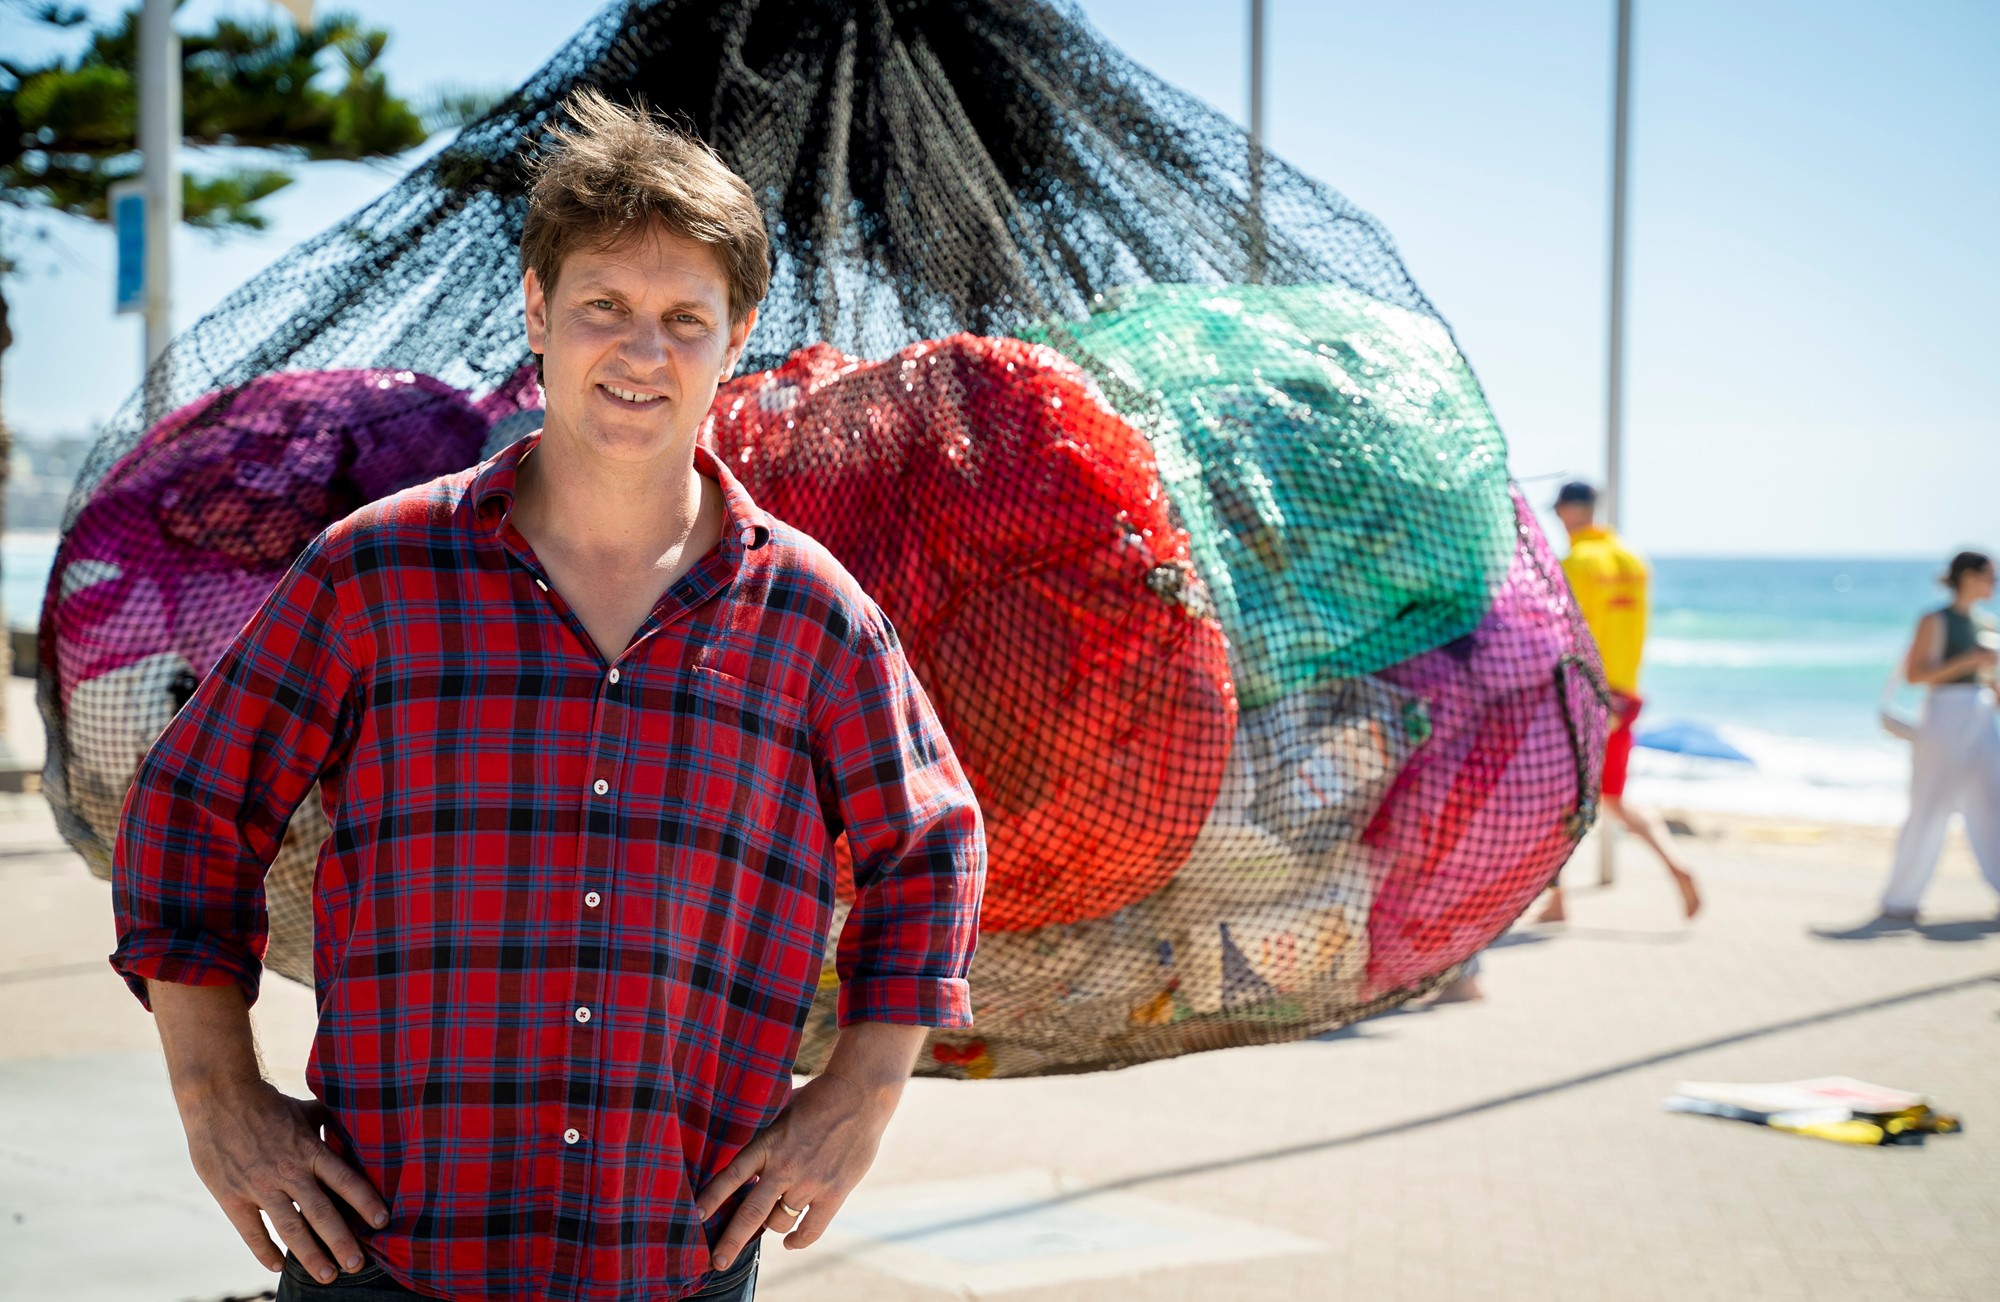 Craig stands with his hands on his hips in front of a black mesh back full of plastic bags that's suspended in the air. The beach is behind him in the background.